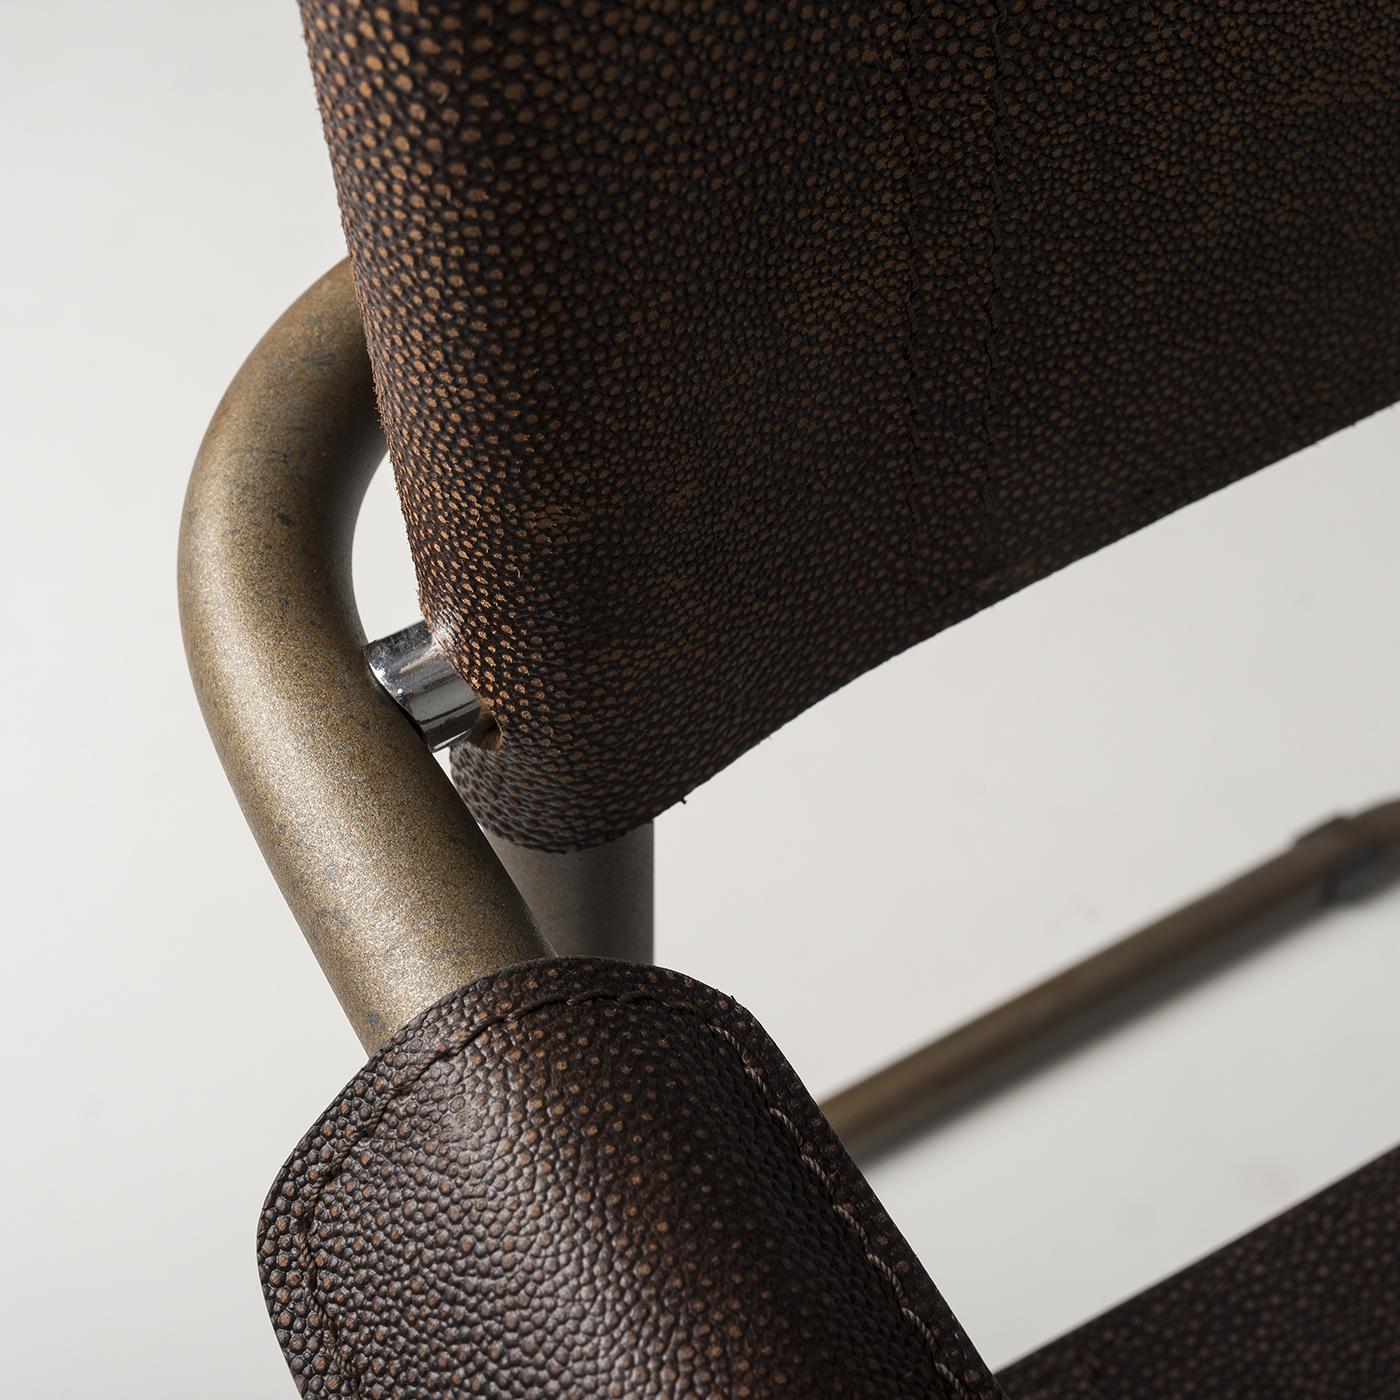 The light and simple lines of this iconic cantilever seat are re-edited and reinterpreted with the use of etching on the metal structure and very particular leather, transporting this object in a dimension with a vintage flavor.